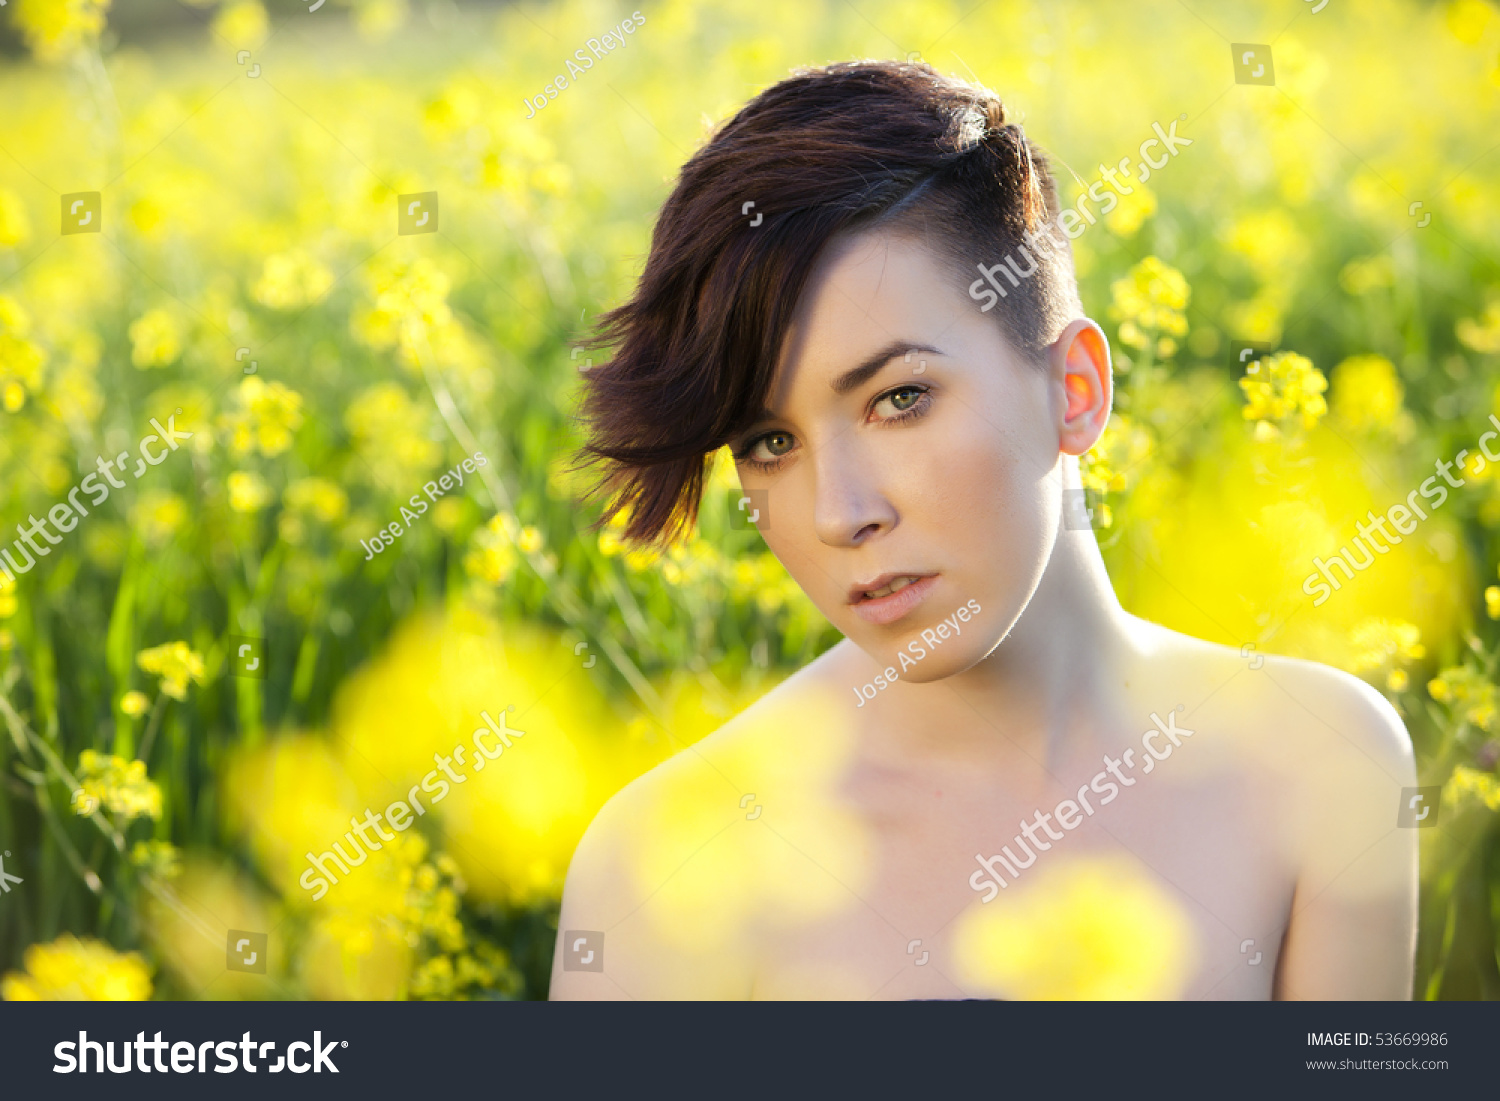 Young Modern Girl With No Clothes On Nature. Stock Photo 53669986